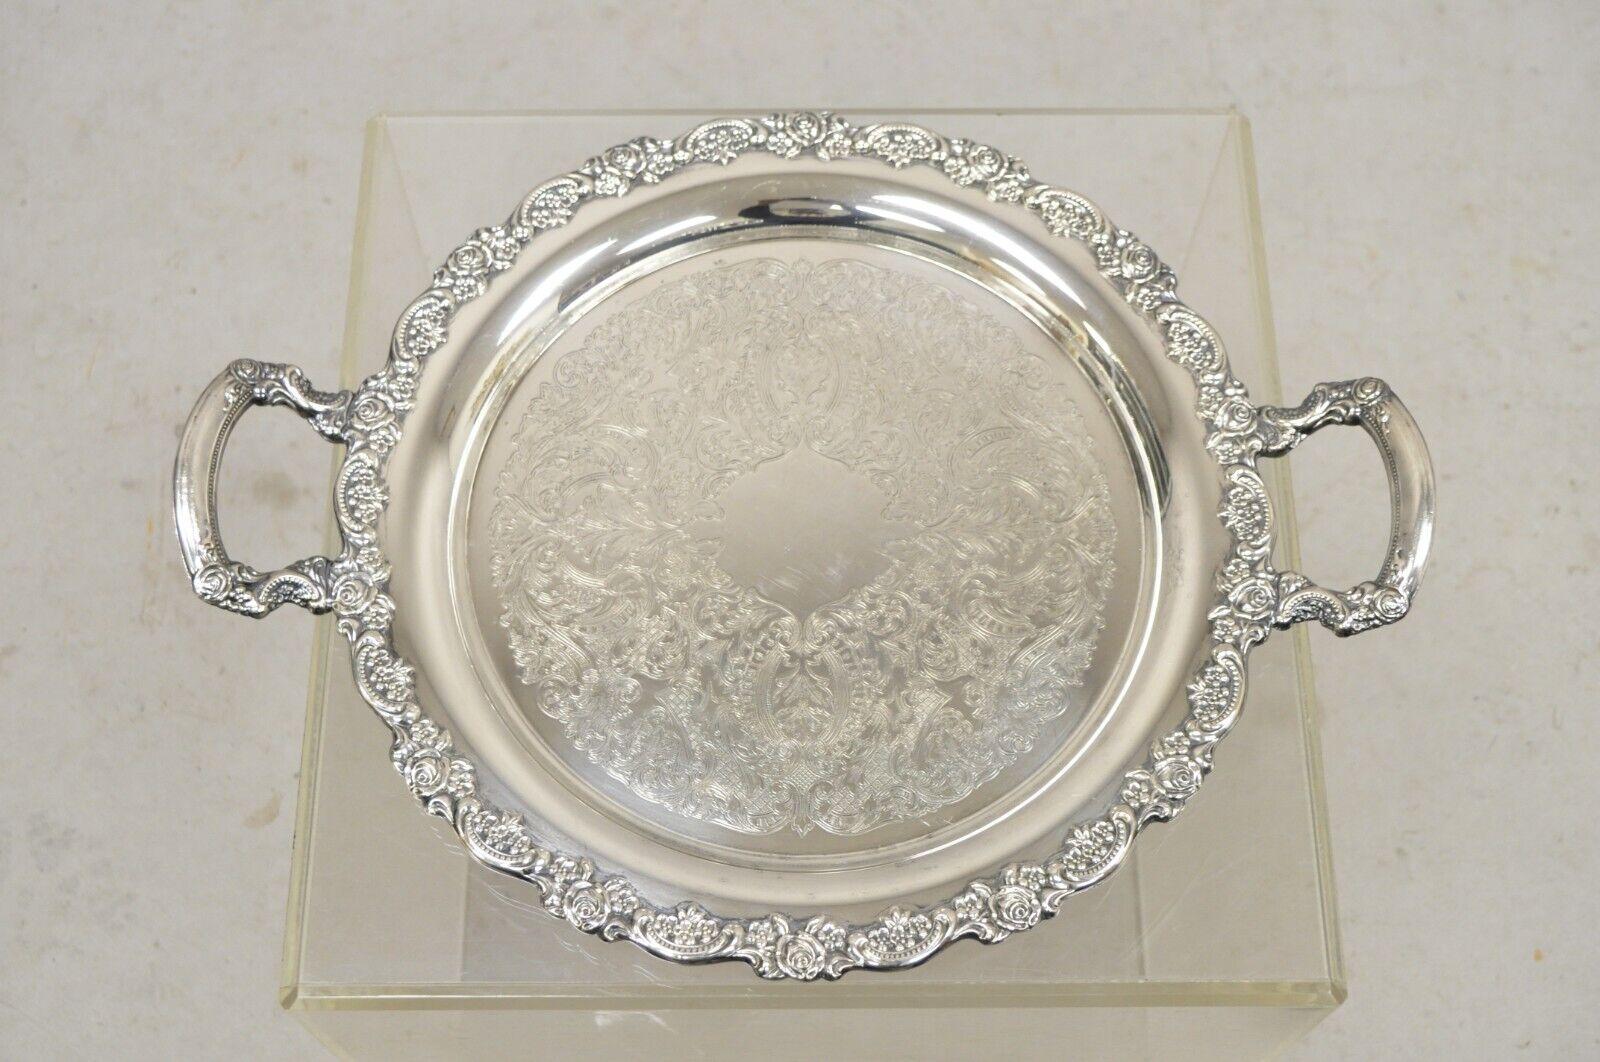 Vtg Oneida Victorian Style Round Silver Plated Serving Platter Tray w handles en vente 5